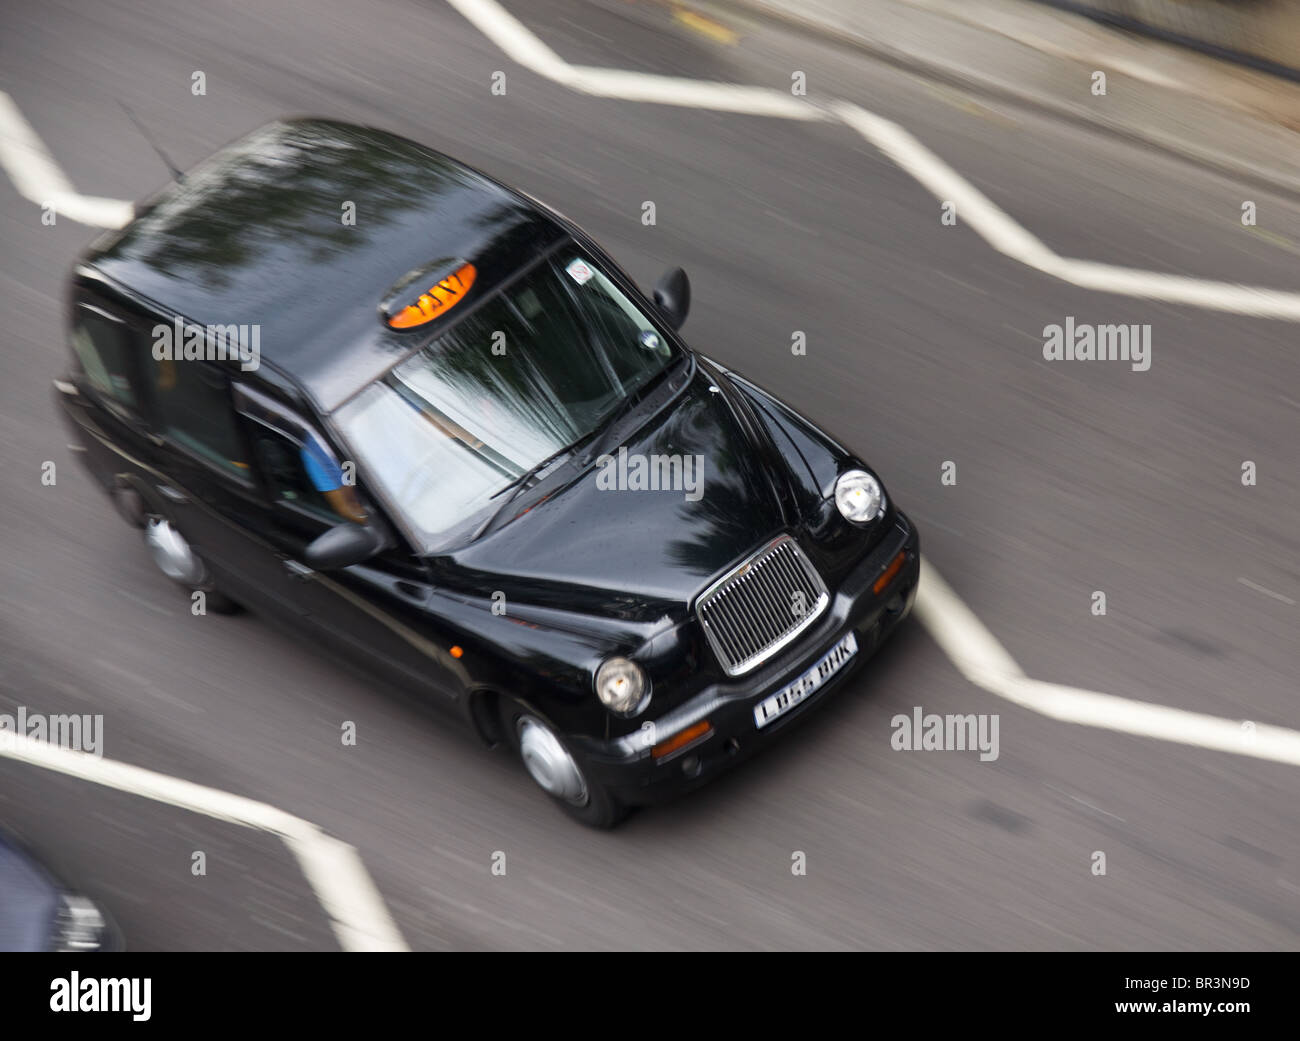 London taxi from above Stock Photo